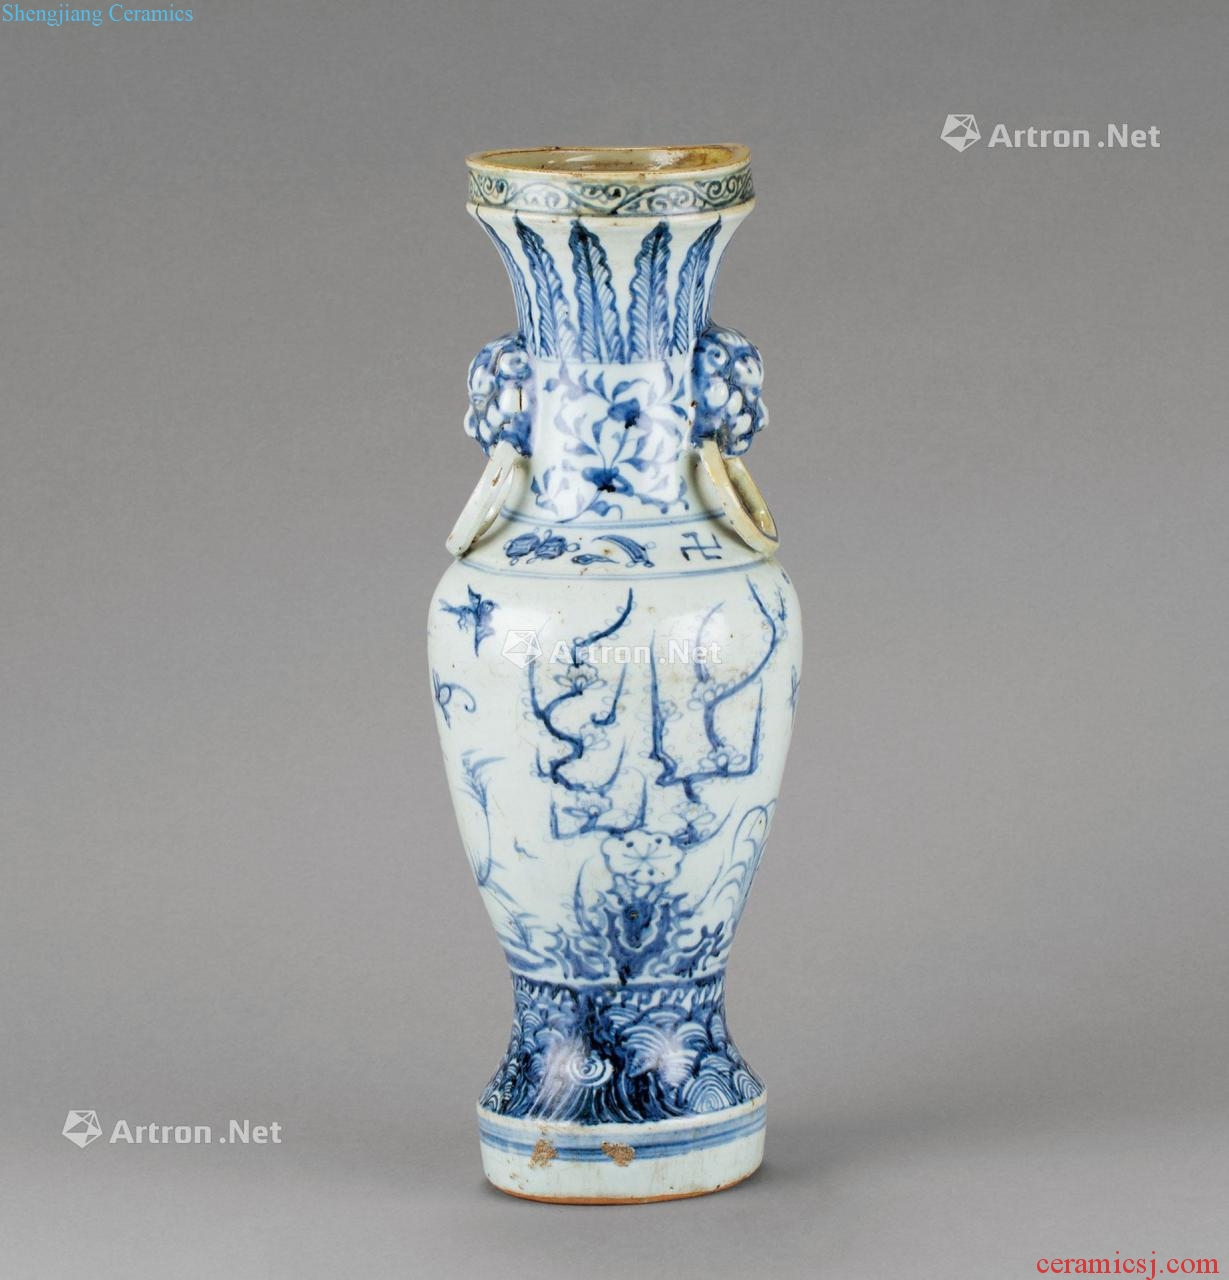 In the Ming dynasty Blue and white vase with a landscape painting of flowers and grain double door knocker